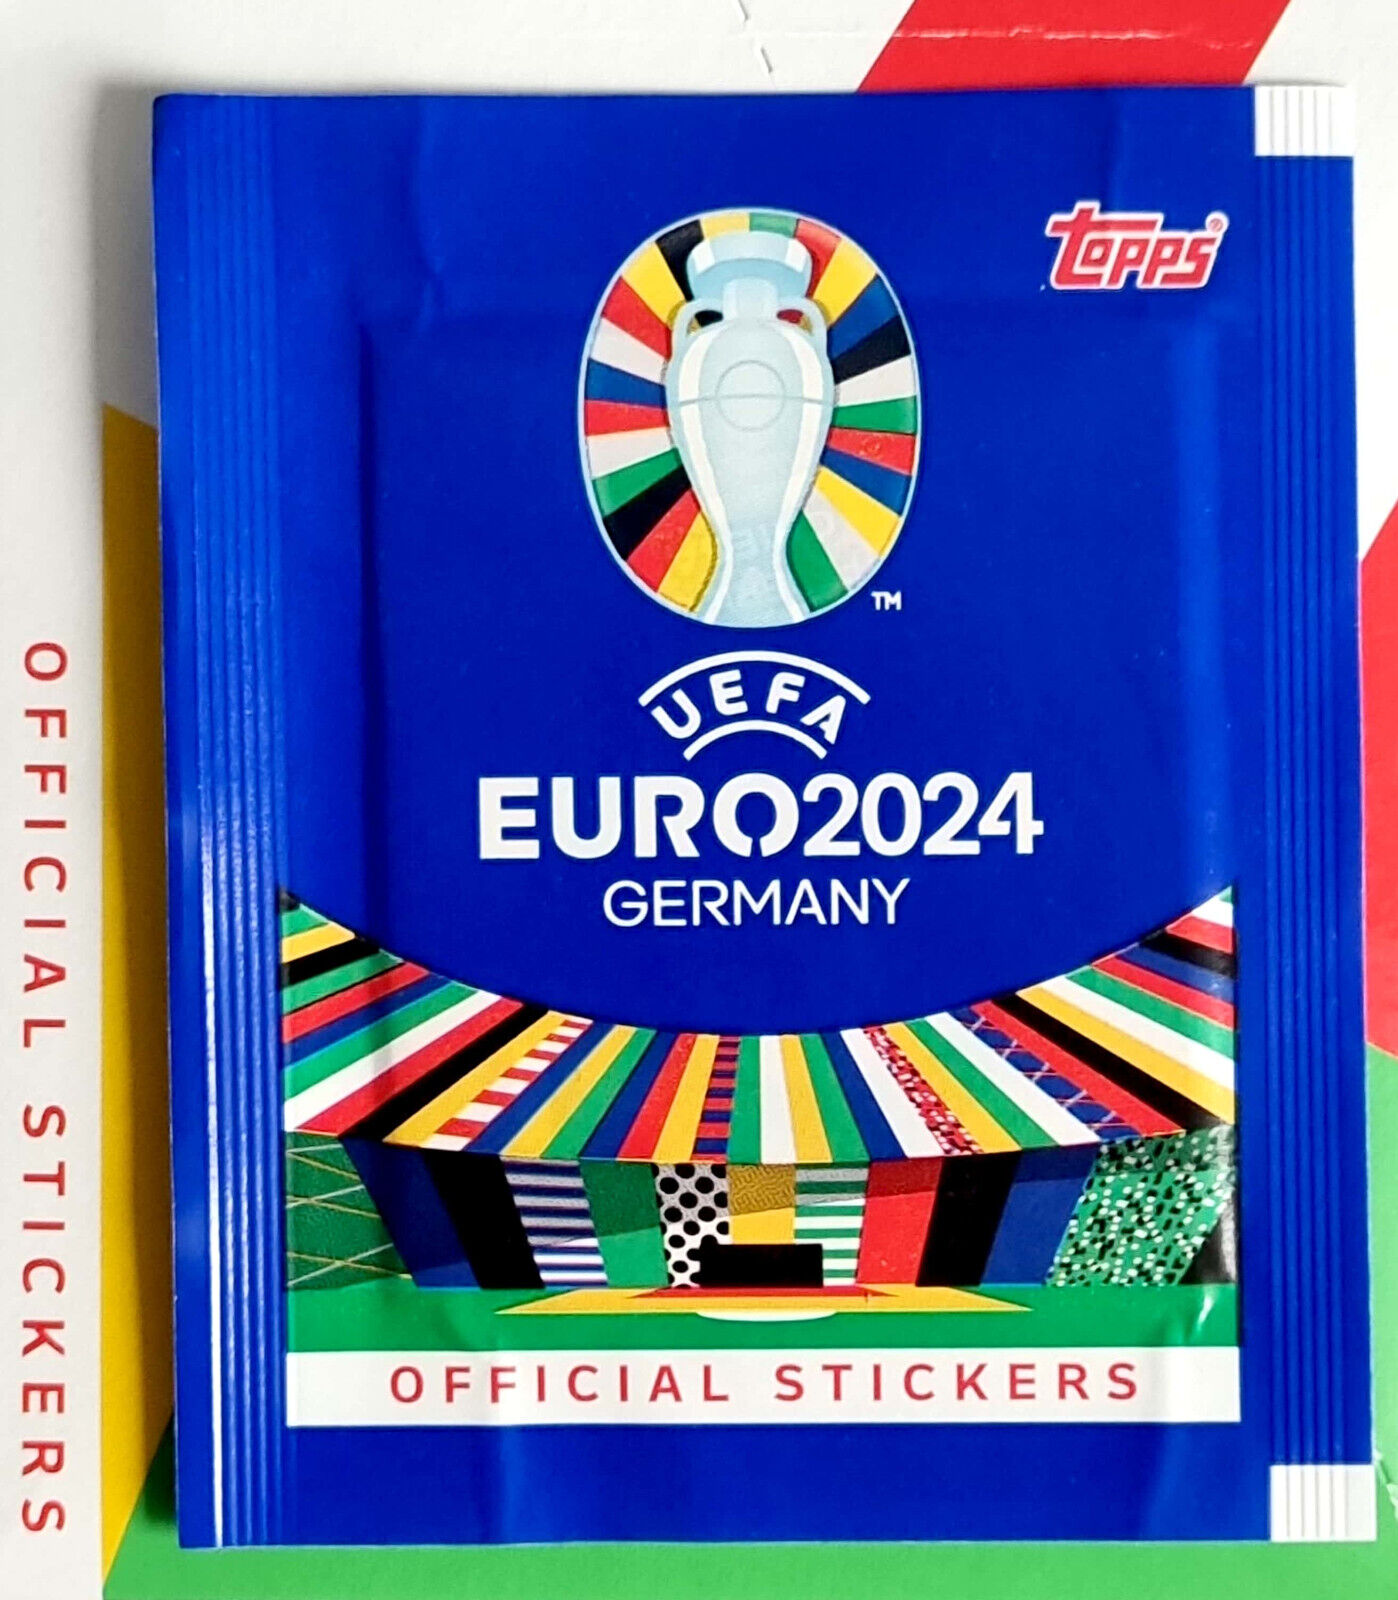 Topps UEFA EURO 2024 stickers -- 50 packs = 300 stickers -- new/original packaging